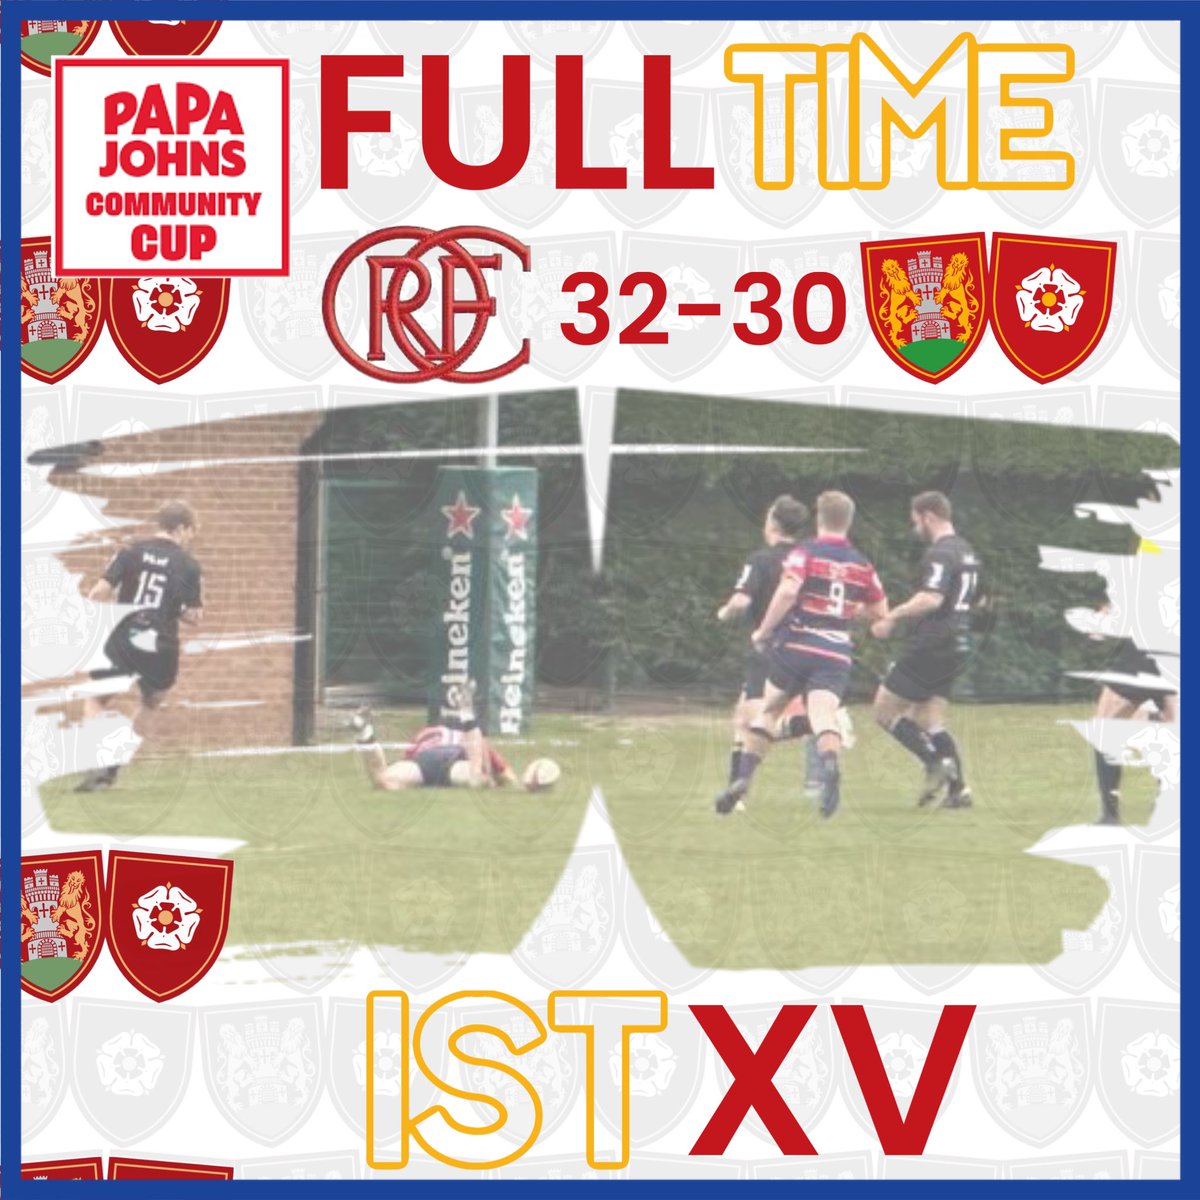 Not to be today but a really gritty performance from the boys to take it right to the wire - losing with the final kick off the game. Congratulations to @official_ORFC and good luck in the final.

Up the N’s

🔴🟡🔵